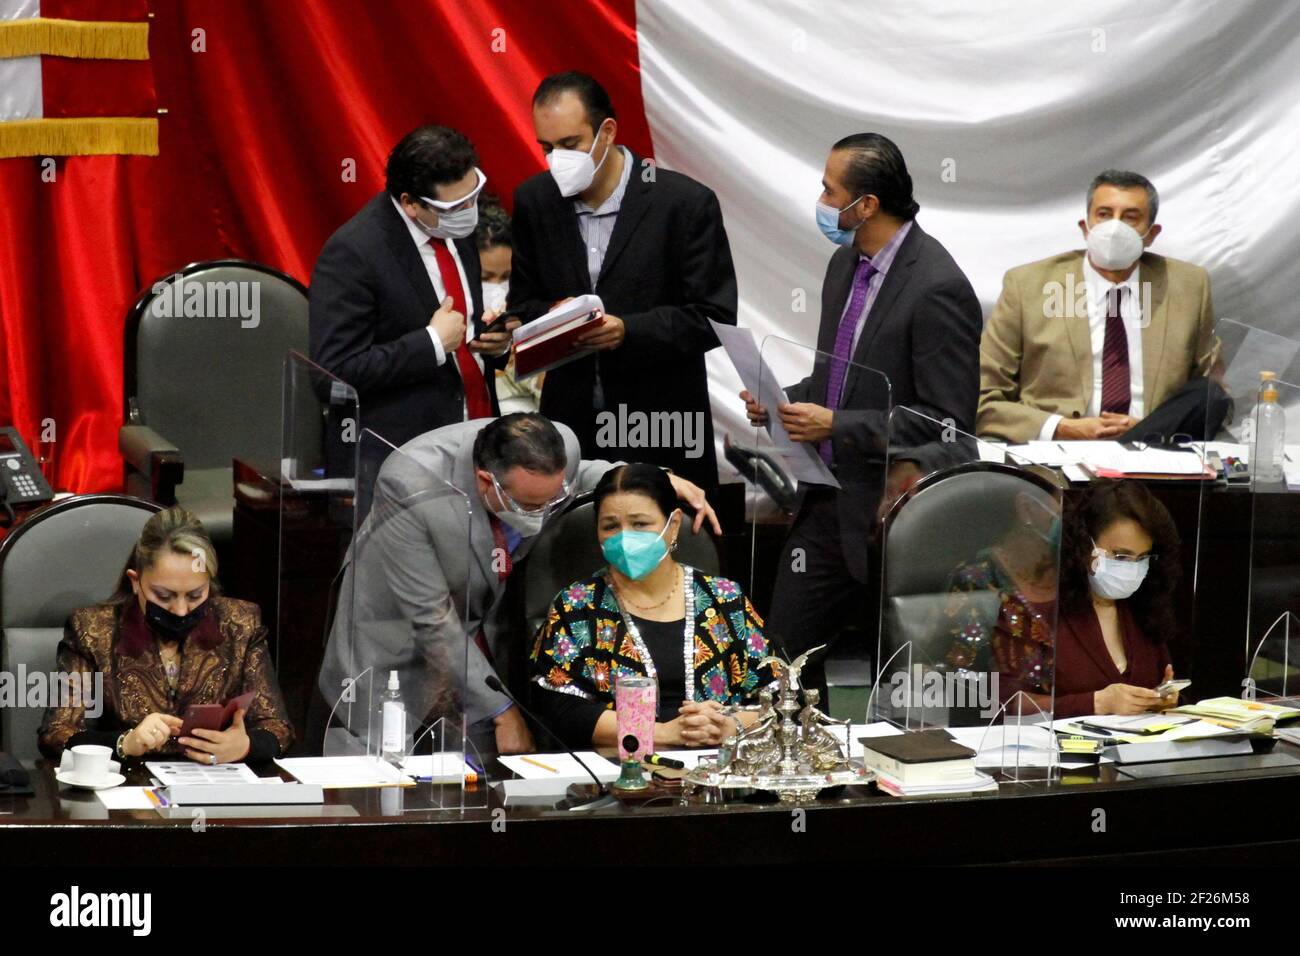 Non Exclusive: MEXICO CITY, MEXICO . MARCH 9:The president of the Board of Directors of the Chamber of Deputies of Mexico, Dulce Maria Sauri Riancho, Stock Photo